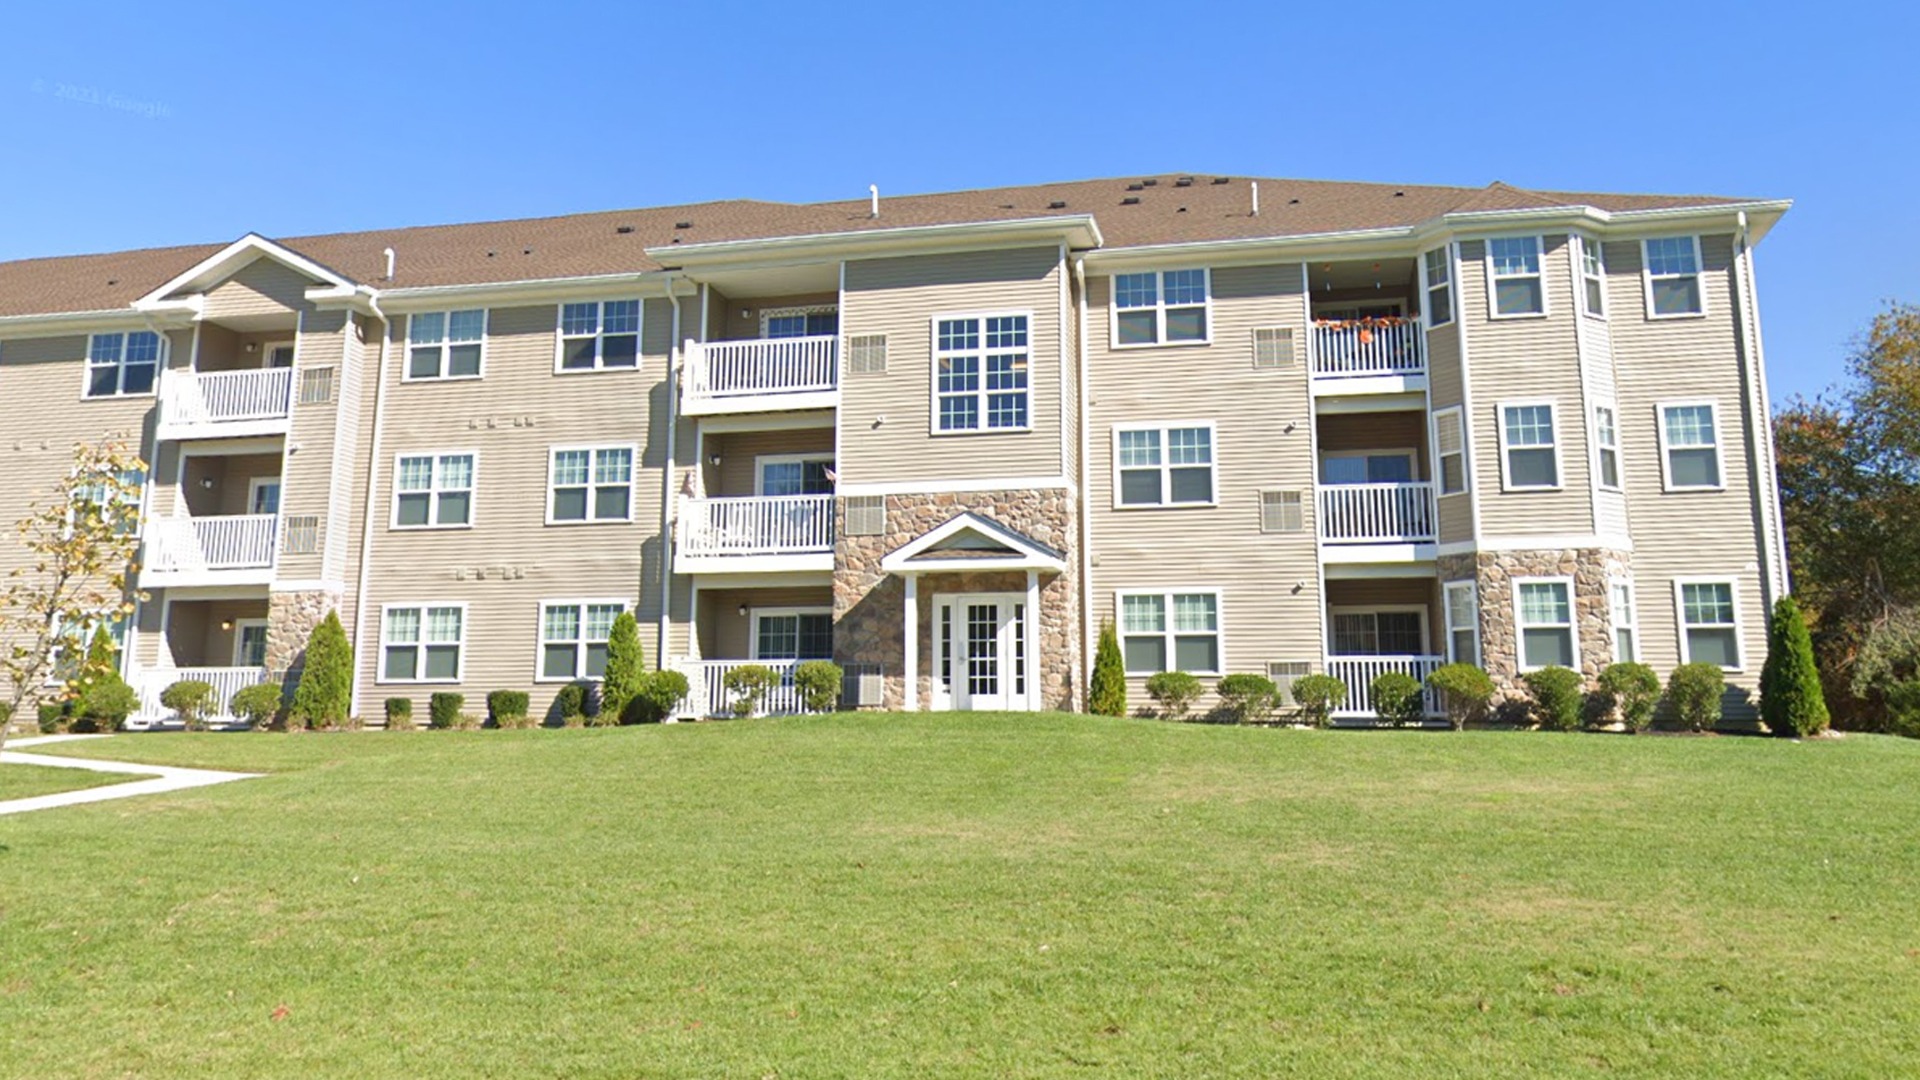 The Colony at Chews Landing Neighborhood in Gloucester Township, NJ